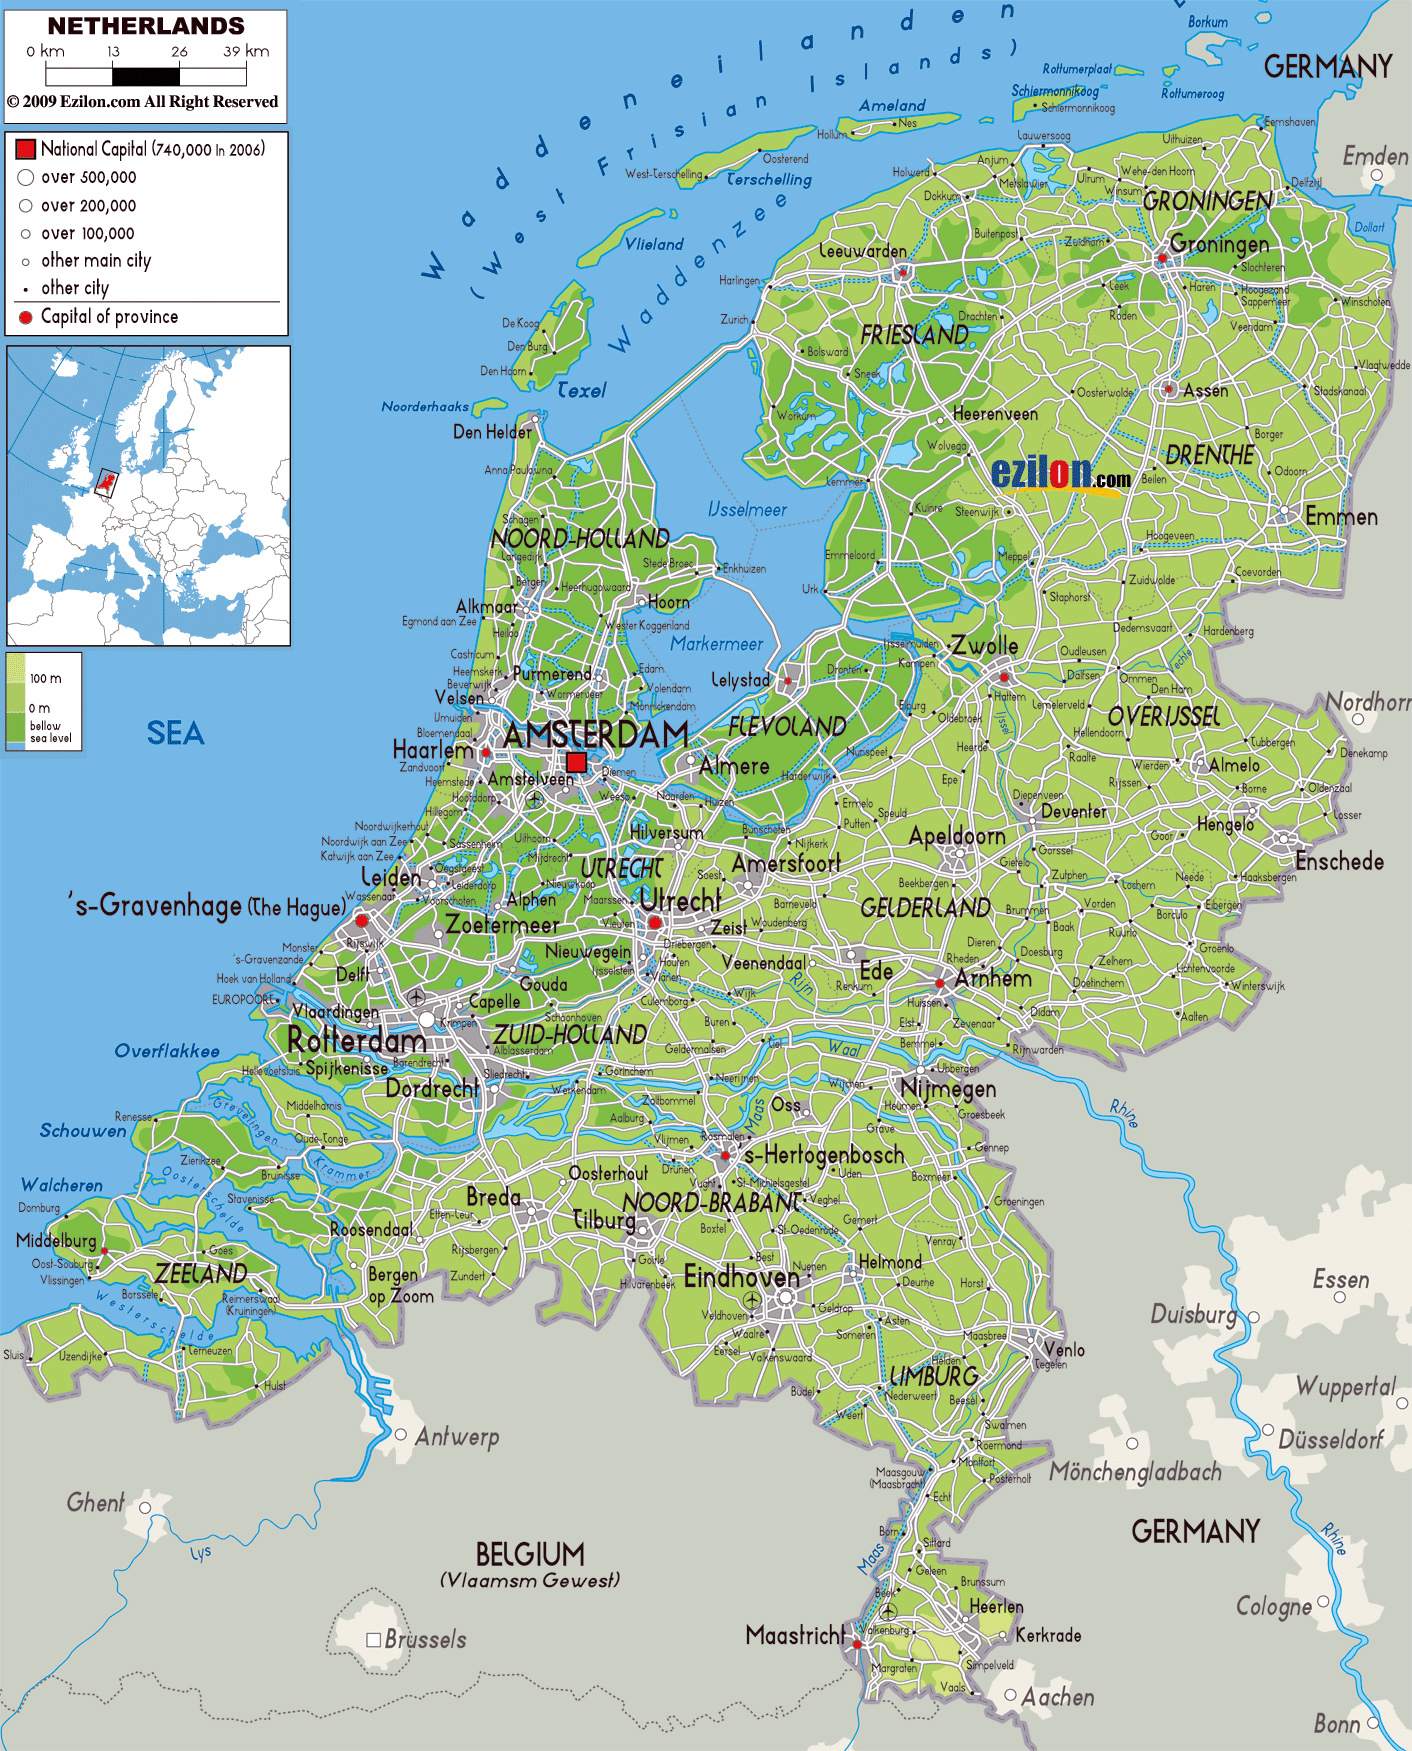 Show Map Of The Netherlands